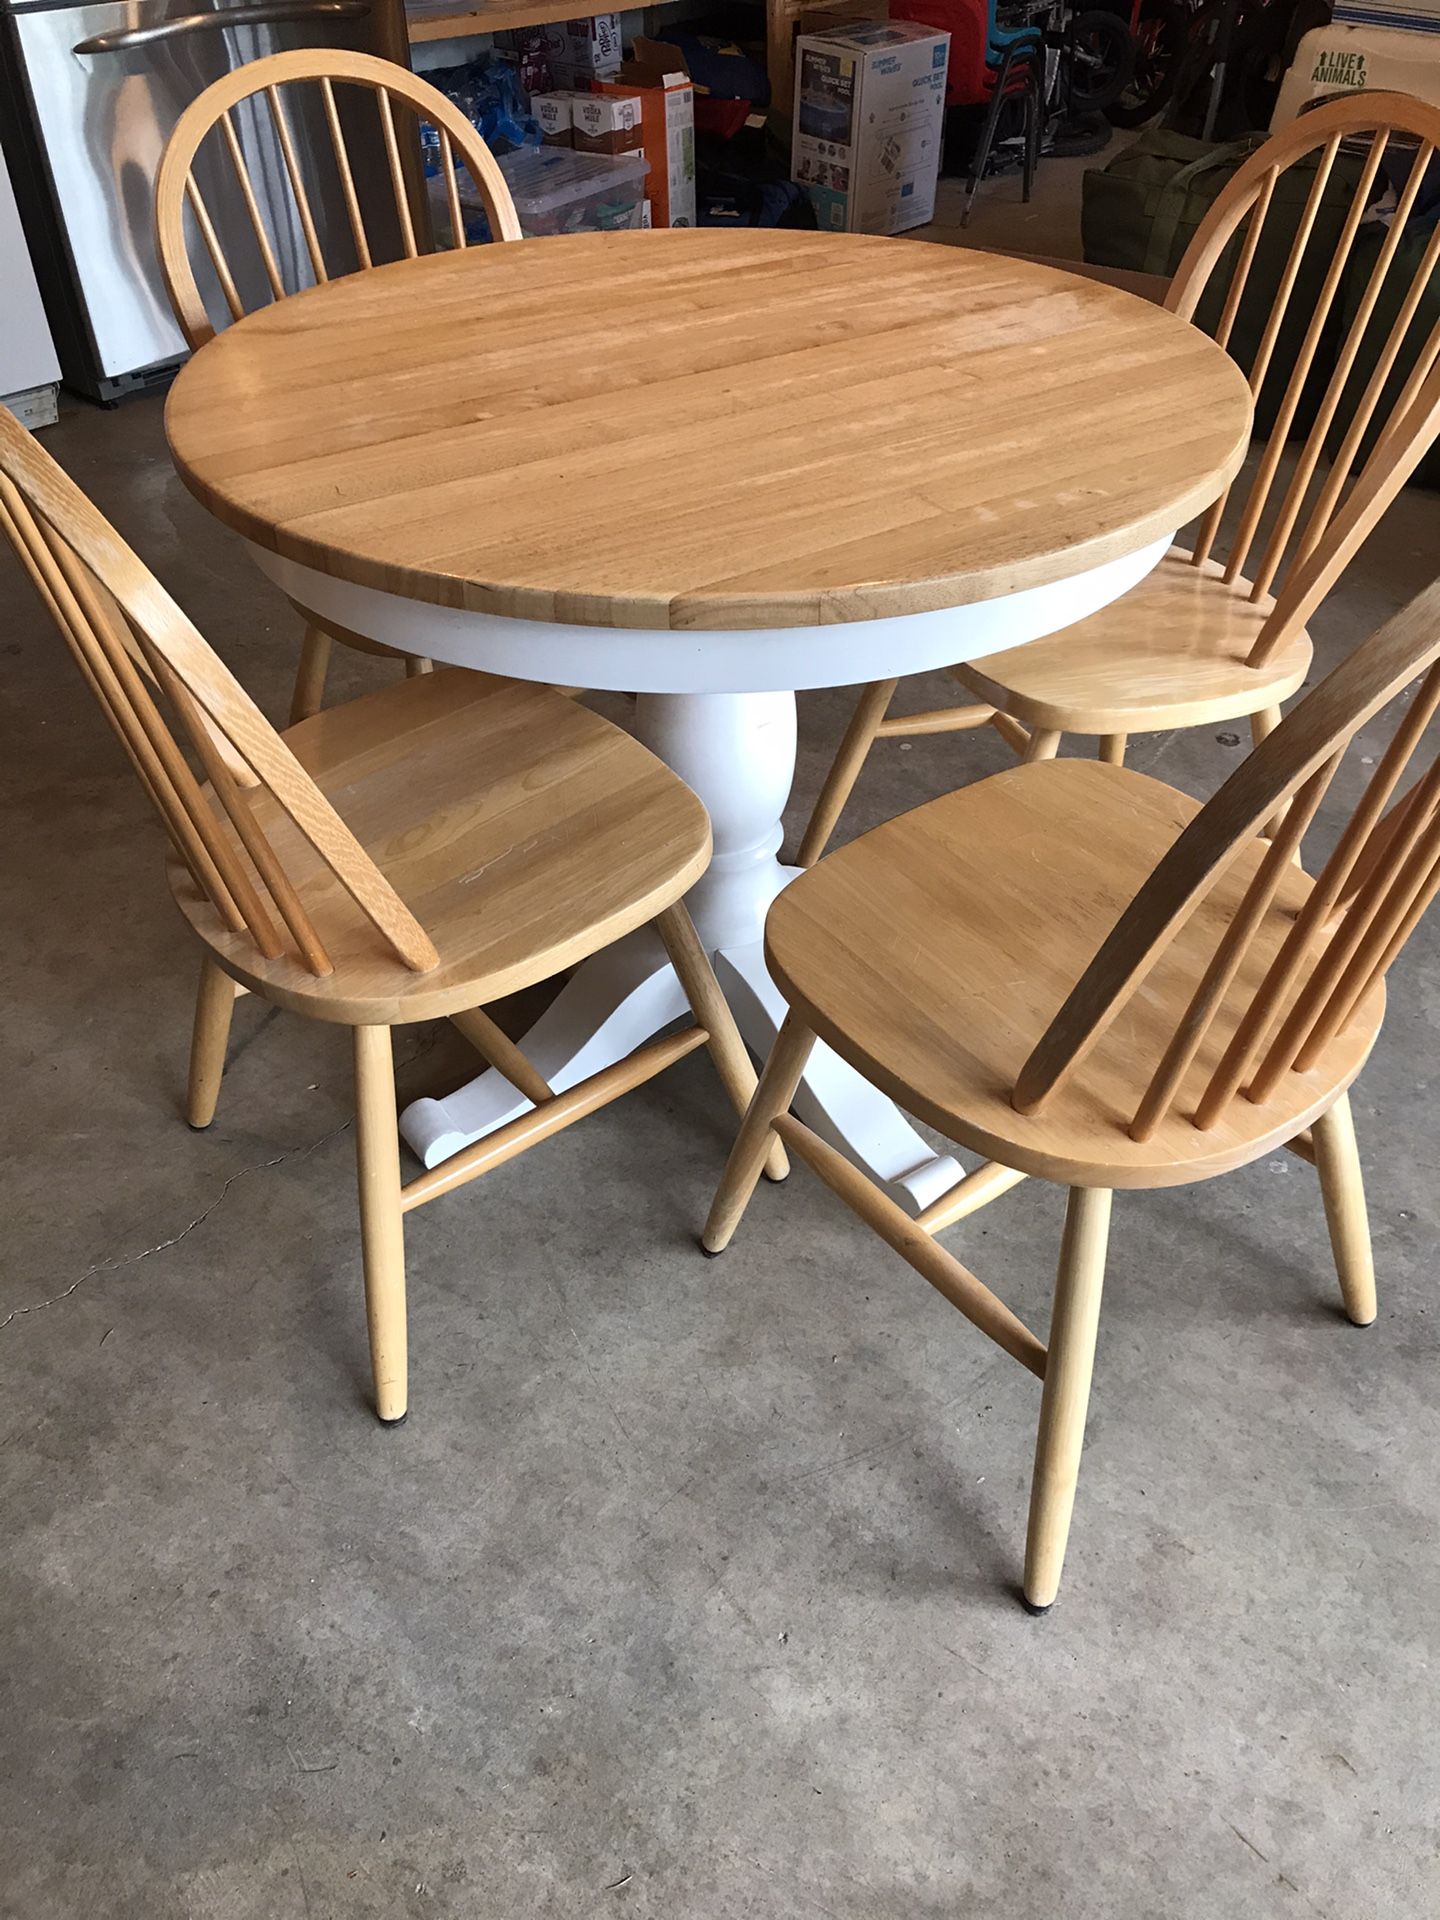 Round pedestal dining table with 4 chairs